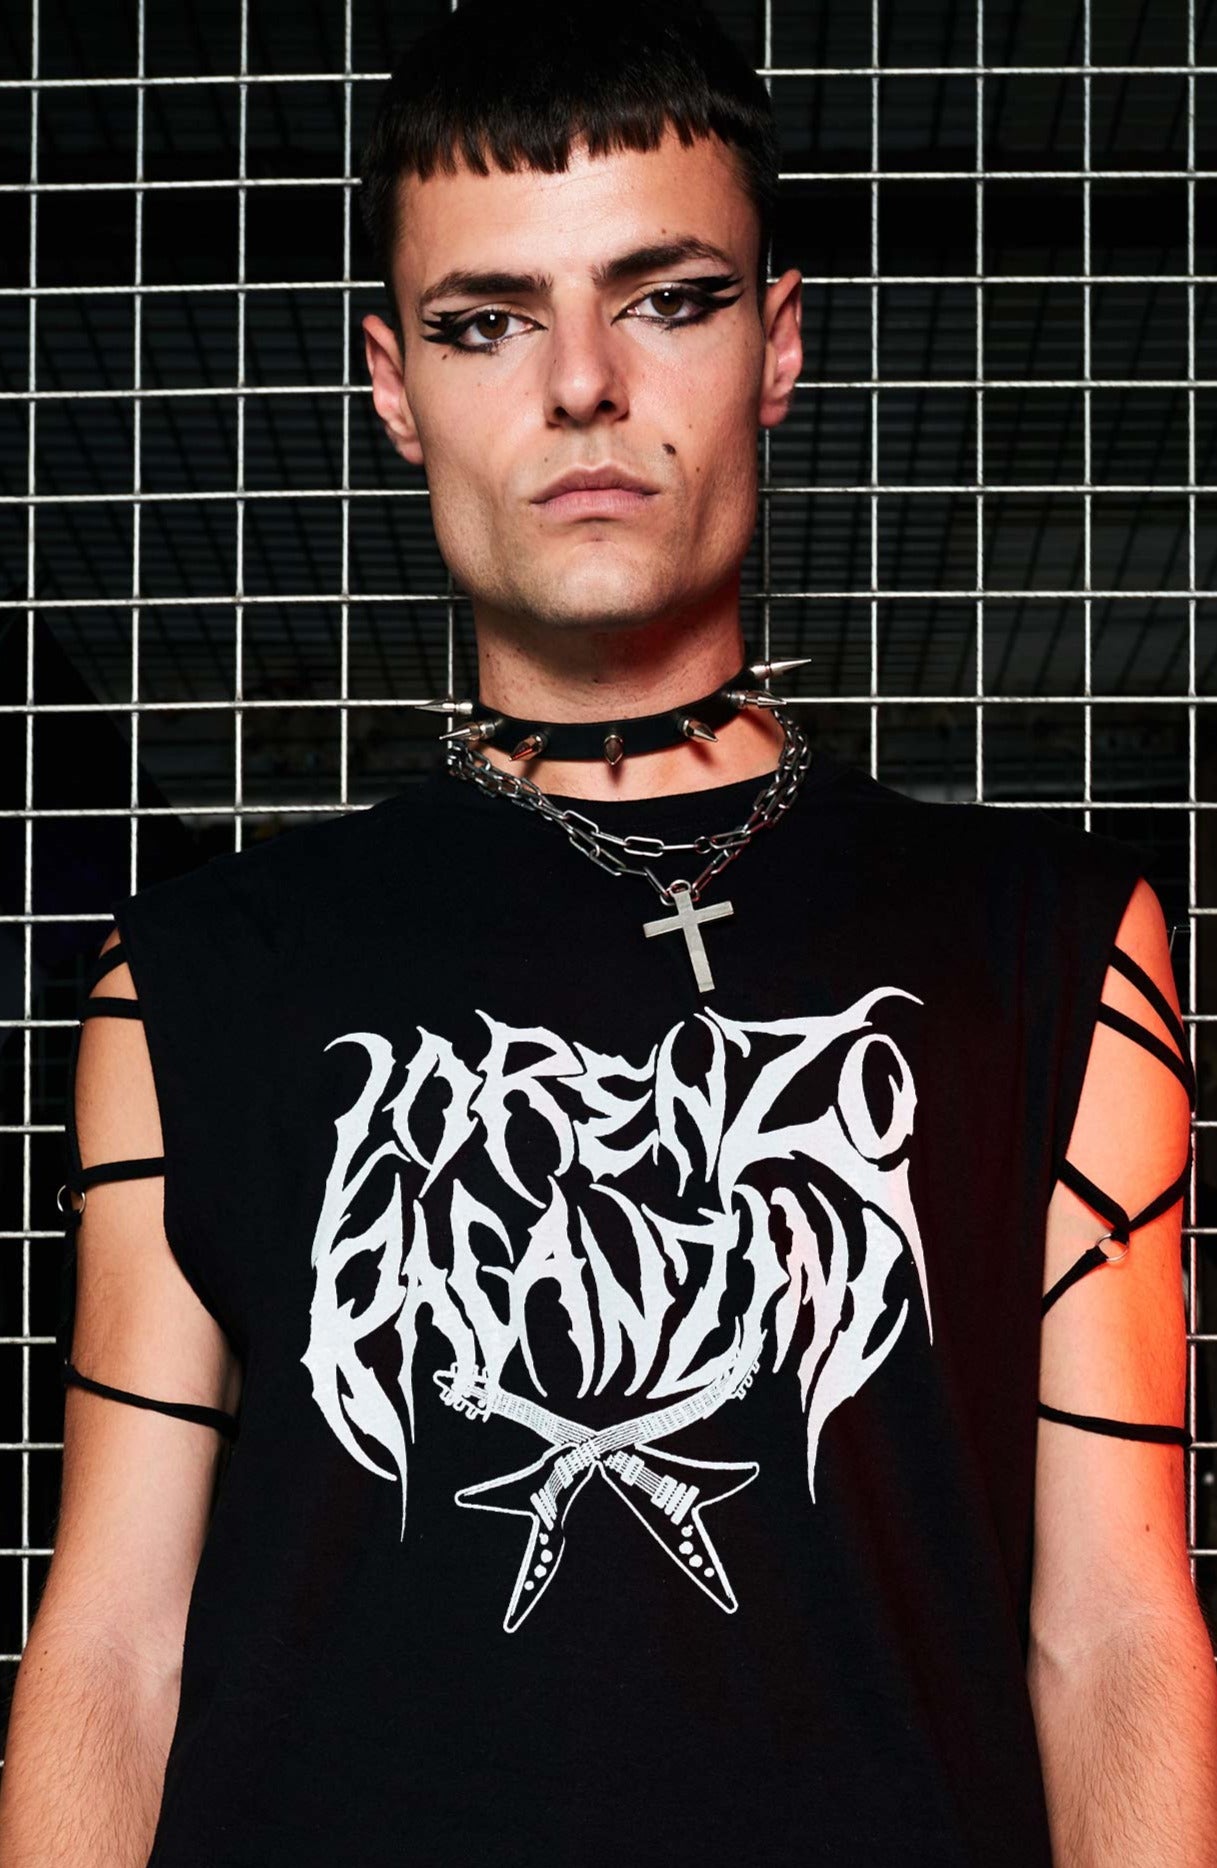 HEX Clothing | Dark clothes, Metal accessories and Techno movement